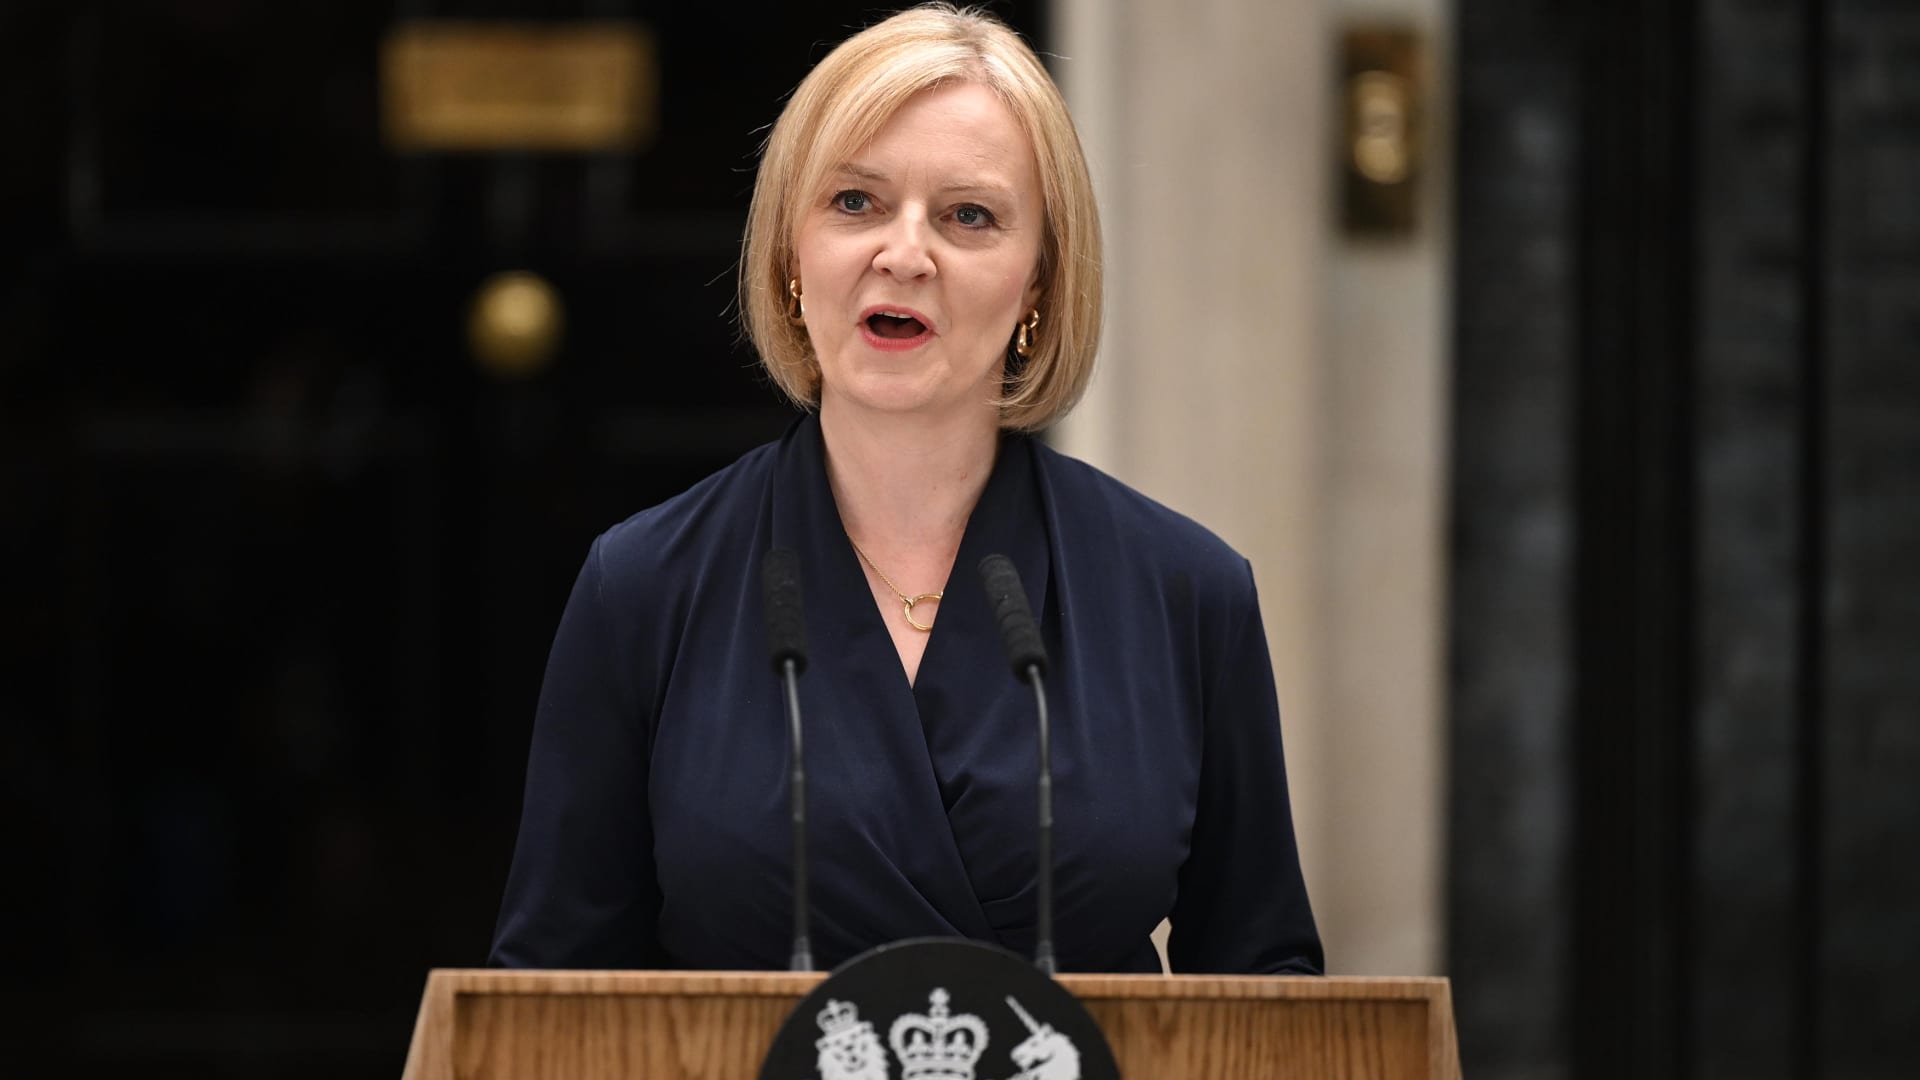 ‘We can ride out the storm’: Liz Truss promises immediate action on energy bills in first speech as UK PM – CNBC